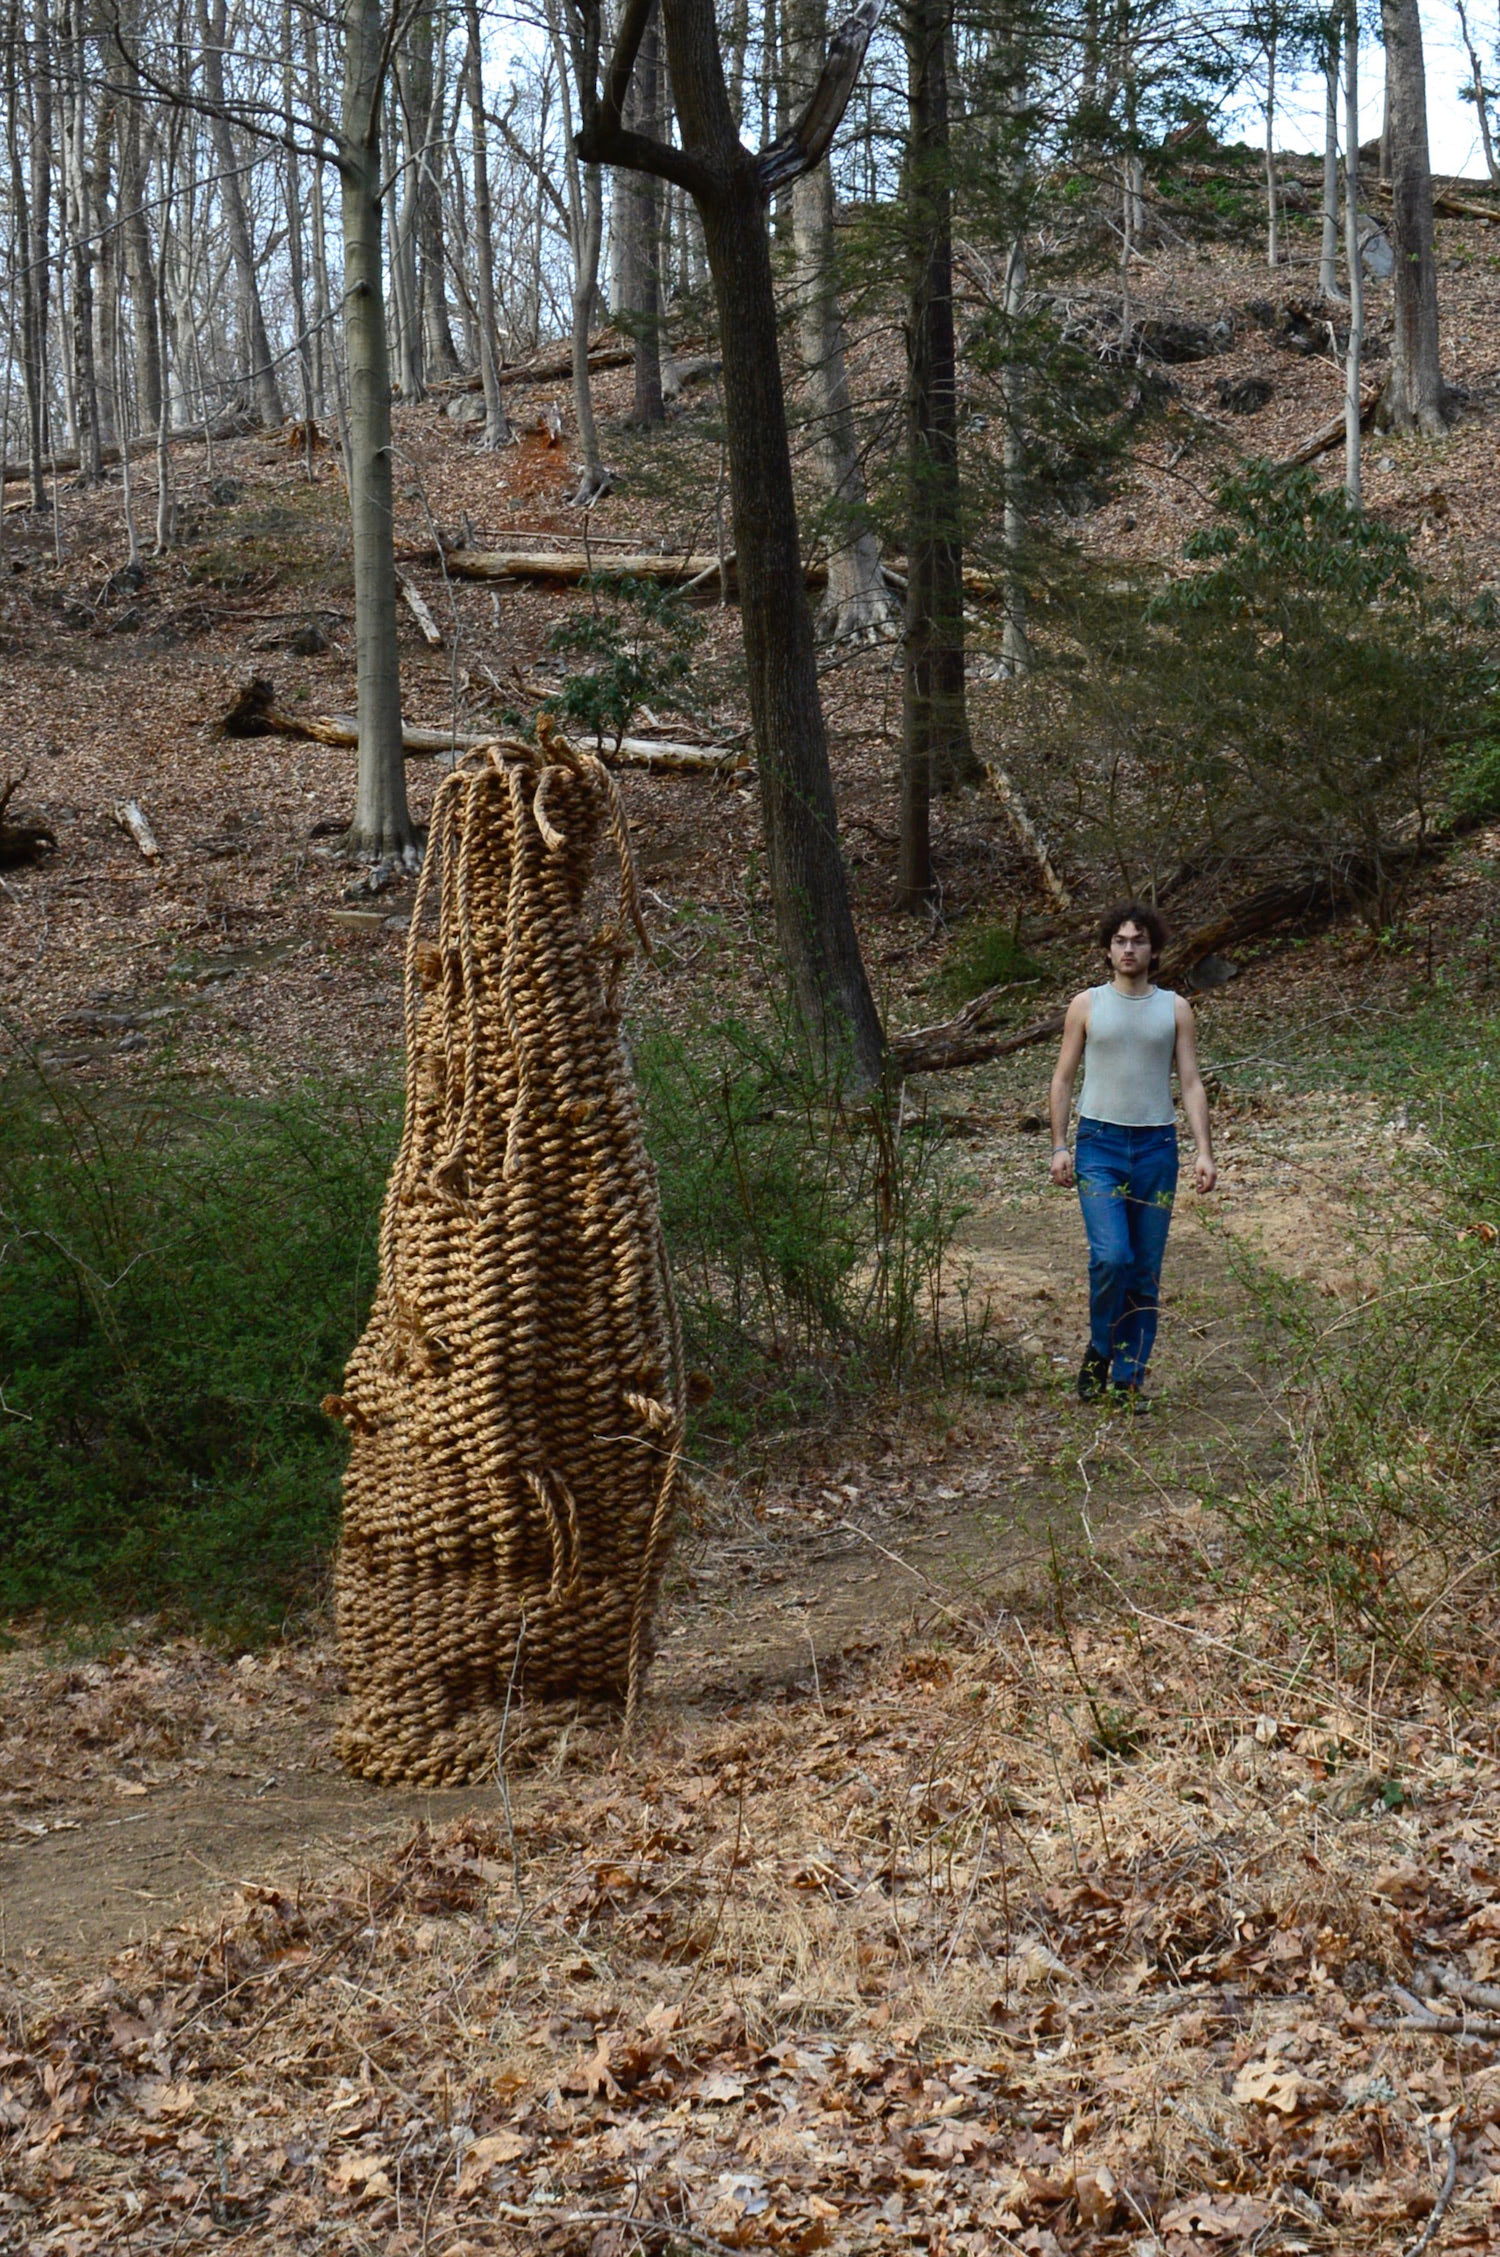 An anthropomorphic basket, or woven column, protrudes from a curving path whose scale is made visible by the artist, who walks toward the viewer from behind the sculpture. Caspar is positioned several feet behind the bushes that line the path and is seen wearing a pale knit tank as well as royal blue jeans. The camera is situated in front of the informational plaque, so the trail marker is not in sight. The left side of the work glows in the sun, so there are deep shadows on its right side.